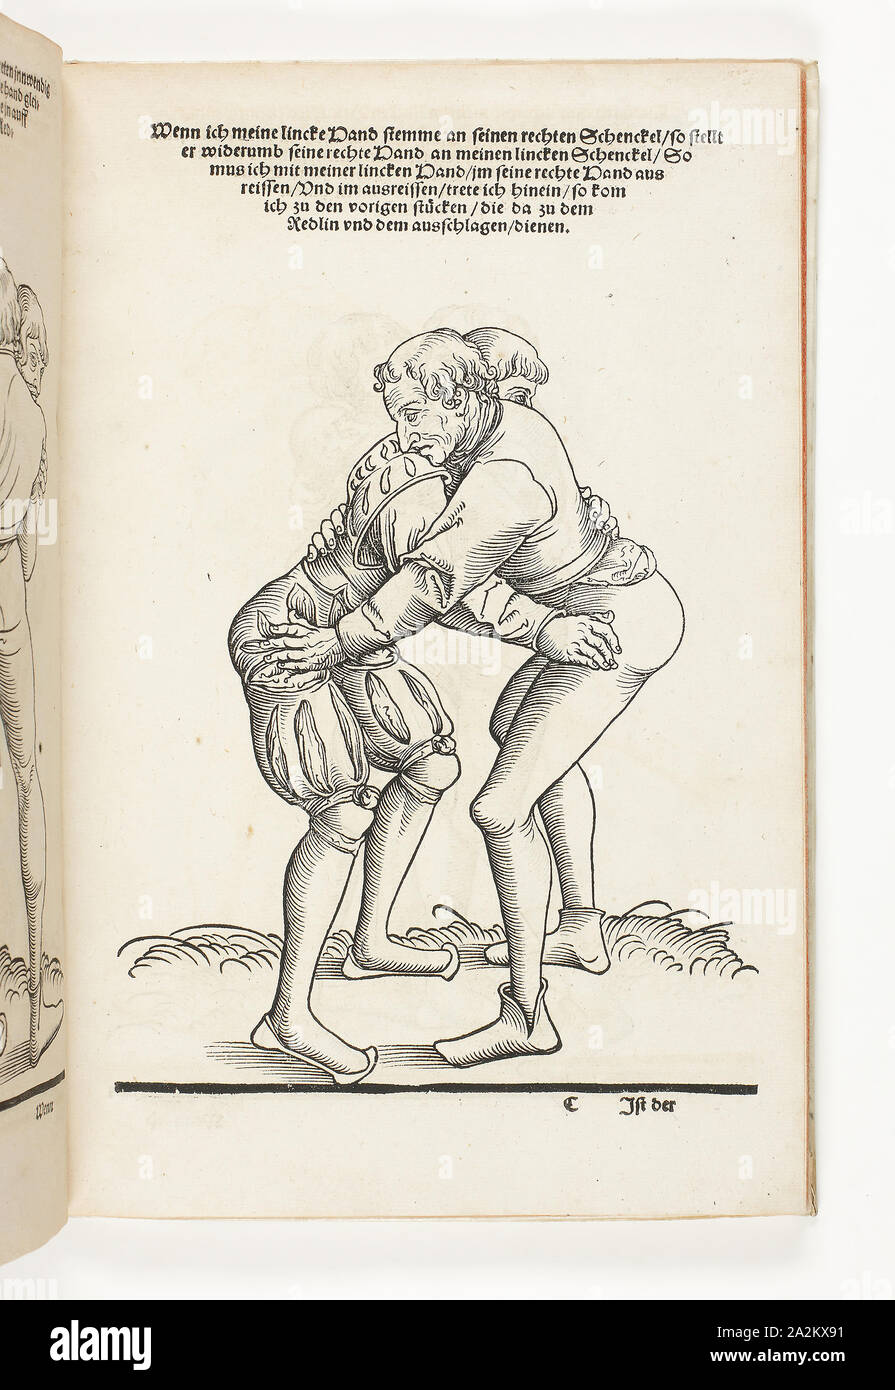 The Art of Wrestling: Eighty-Five Pieces (Ringer Kunst: Fünff und Achtzig Stücke), 1539, Lucas Cranach the Younger (German, 1515-1586), written by Fabian von Auerswald (German, born 1462), printed by Hans Lufft (German, 1495-1584), Germany, Book with woodcuts and letterpress in black on cream laid paper, 301 × 195 × 16 mm Stock Photo